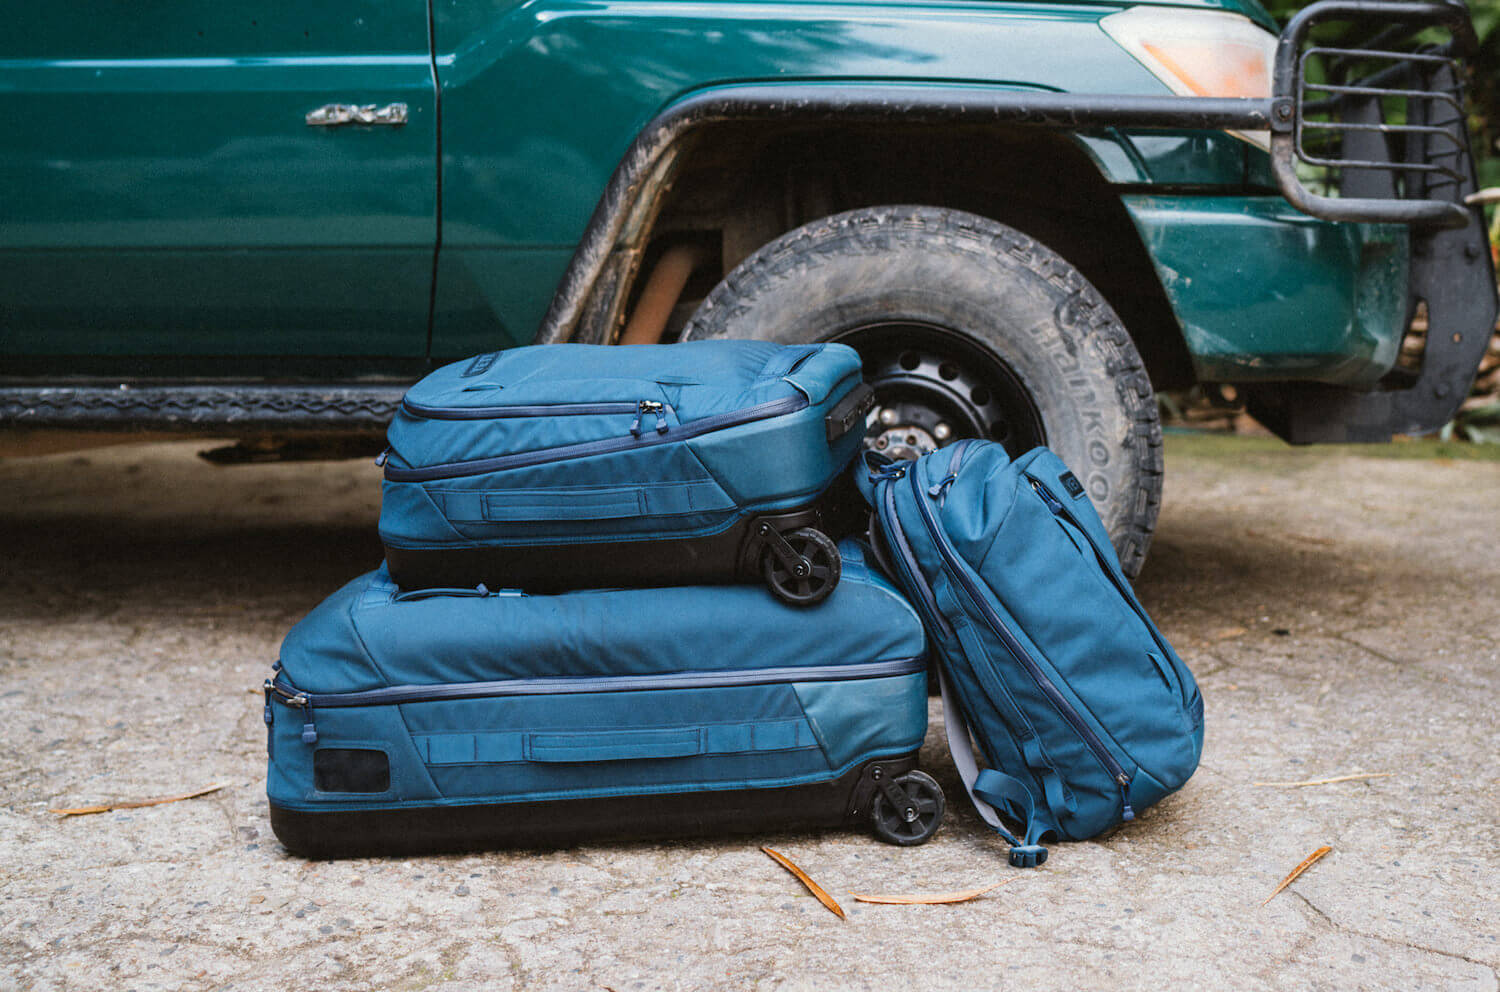 New YETI 'Crossroads' Packs & Bags Ready to Hit the Road - Man 